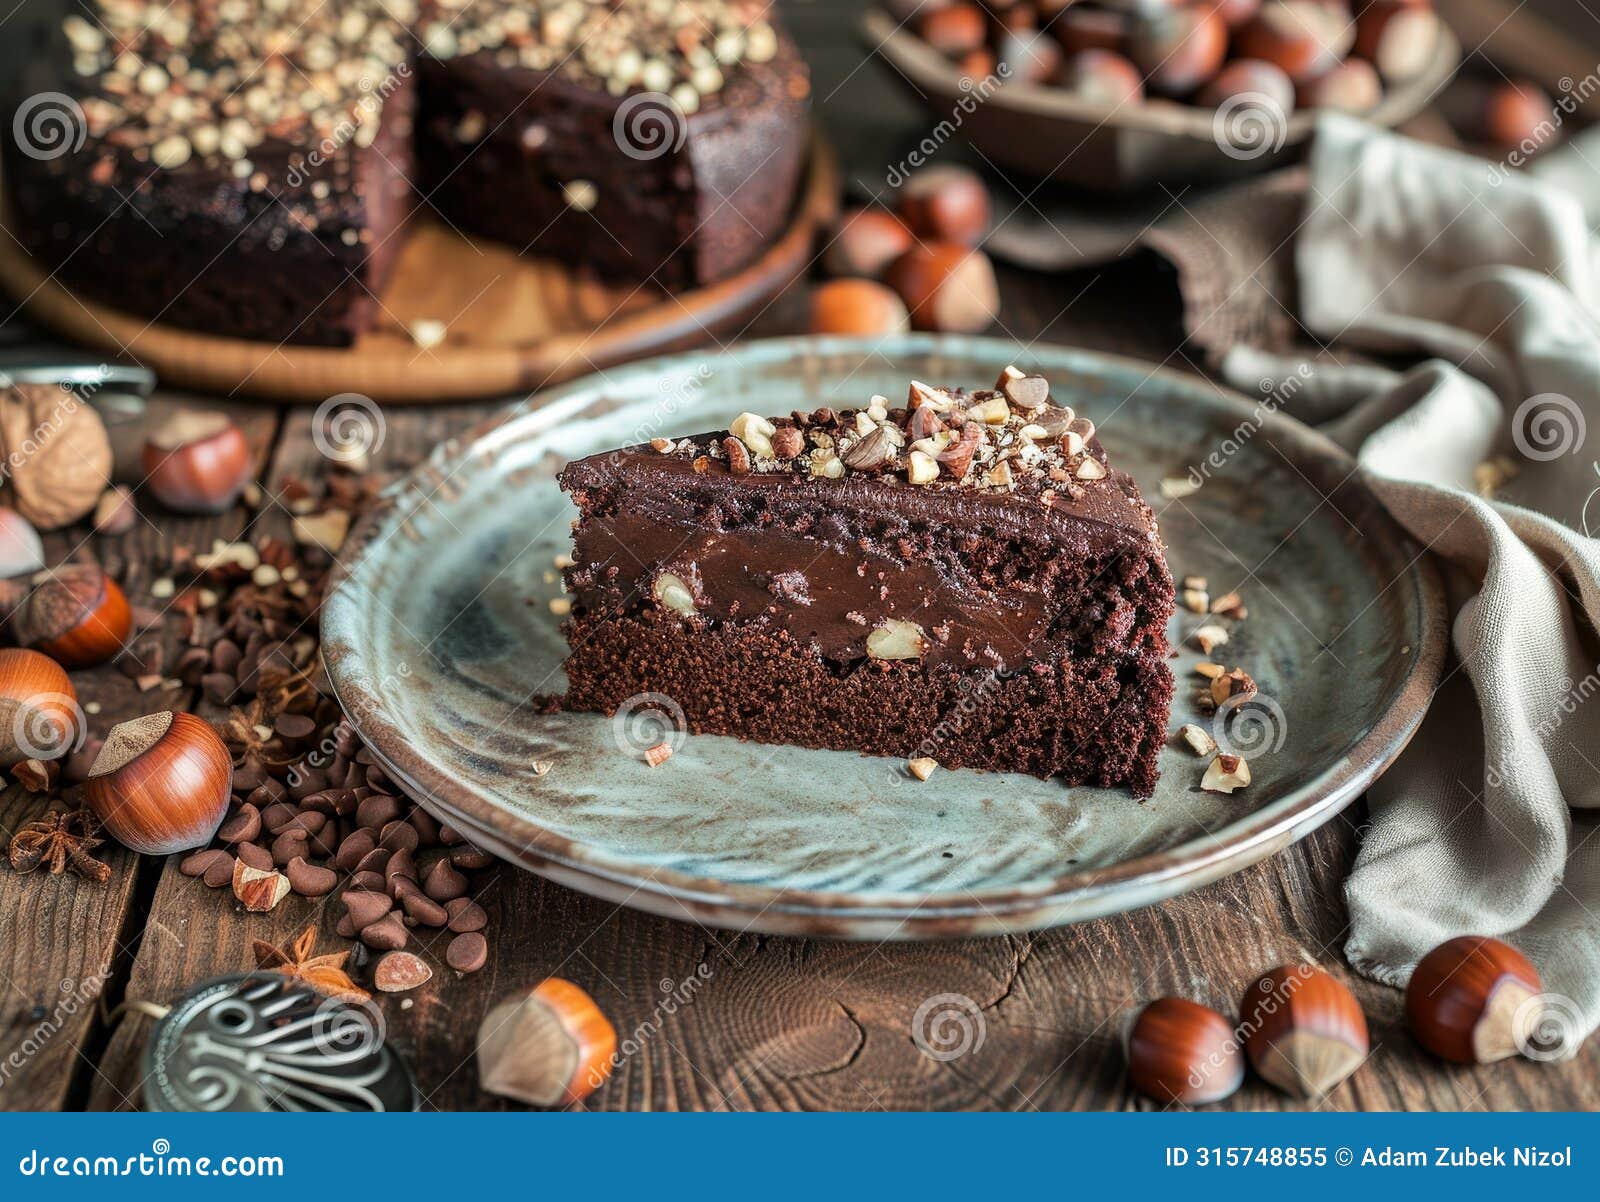 decadent chocolate cake with nuts